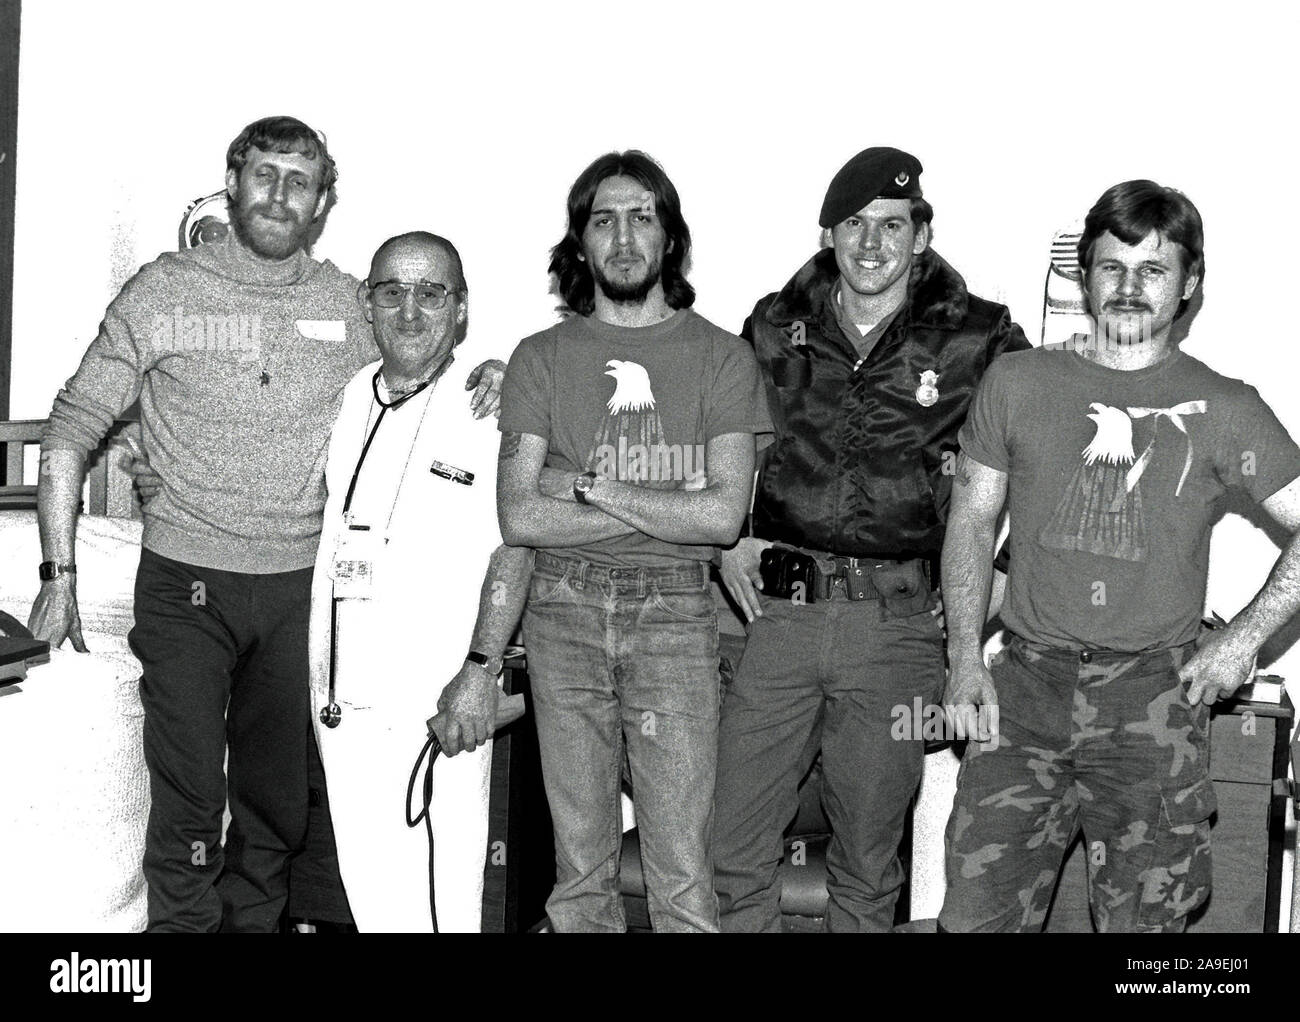 1981 - Former hostages U.S. Marine Corps SSGT Michael Moeller and SGT James Lopez, U.S. Air Force SRA Richard Jiran, and U.S. Marine Corps SGT Paul Lewis, left to right, pose with a nurse. Stock Photo